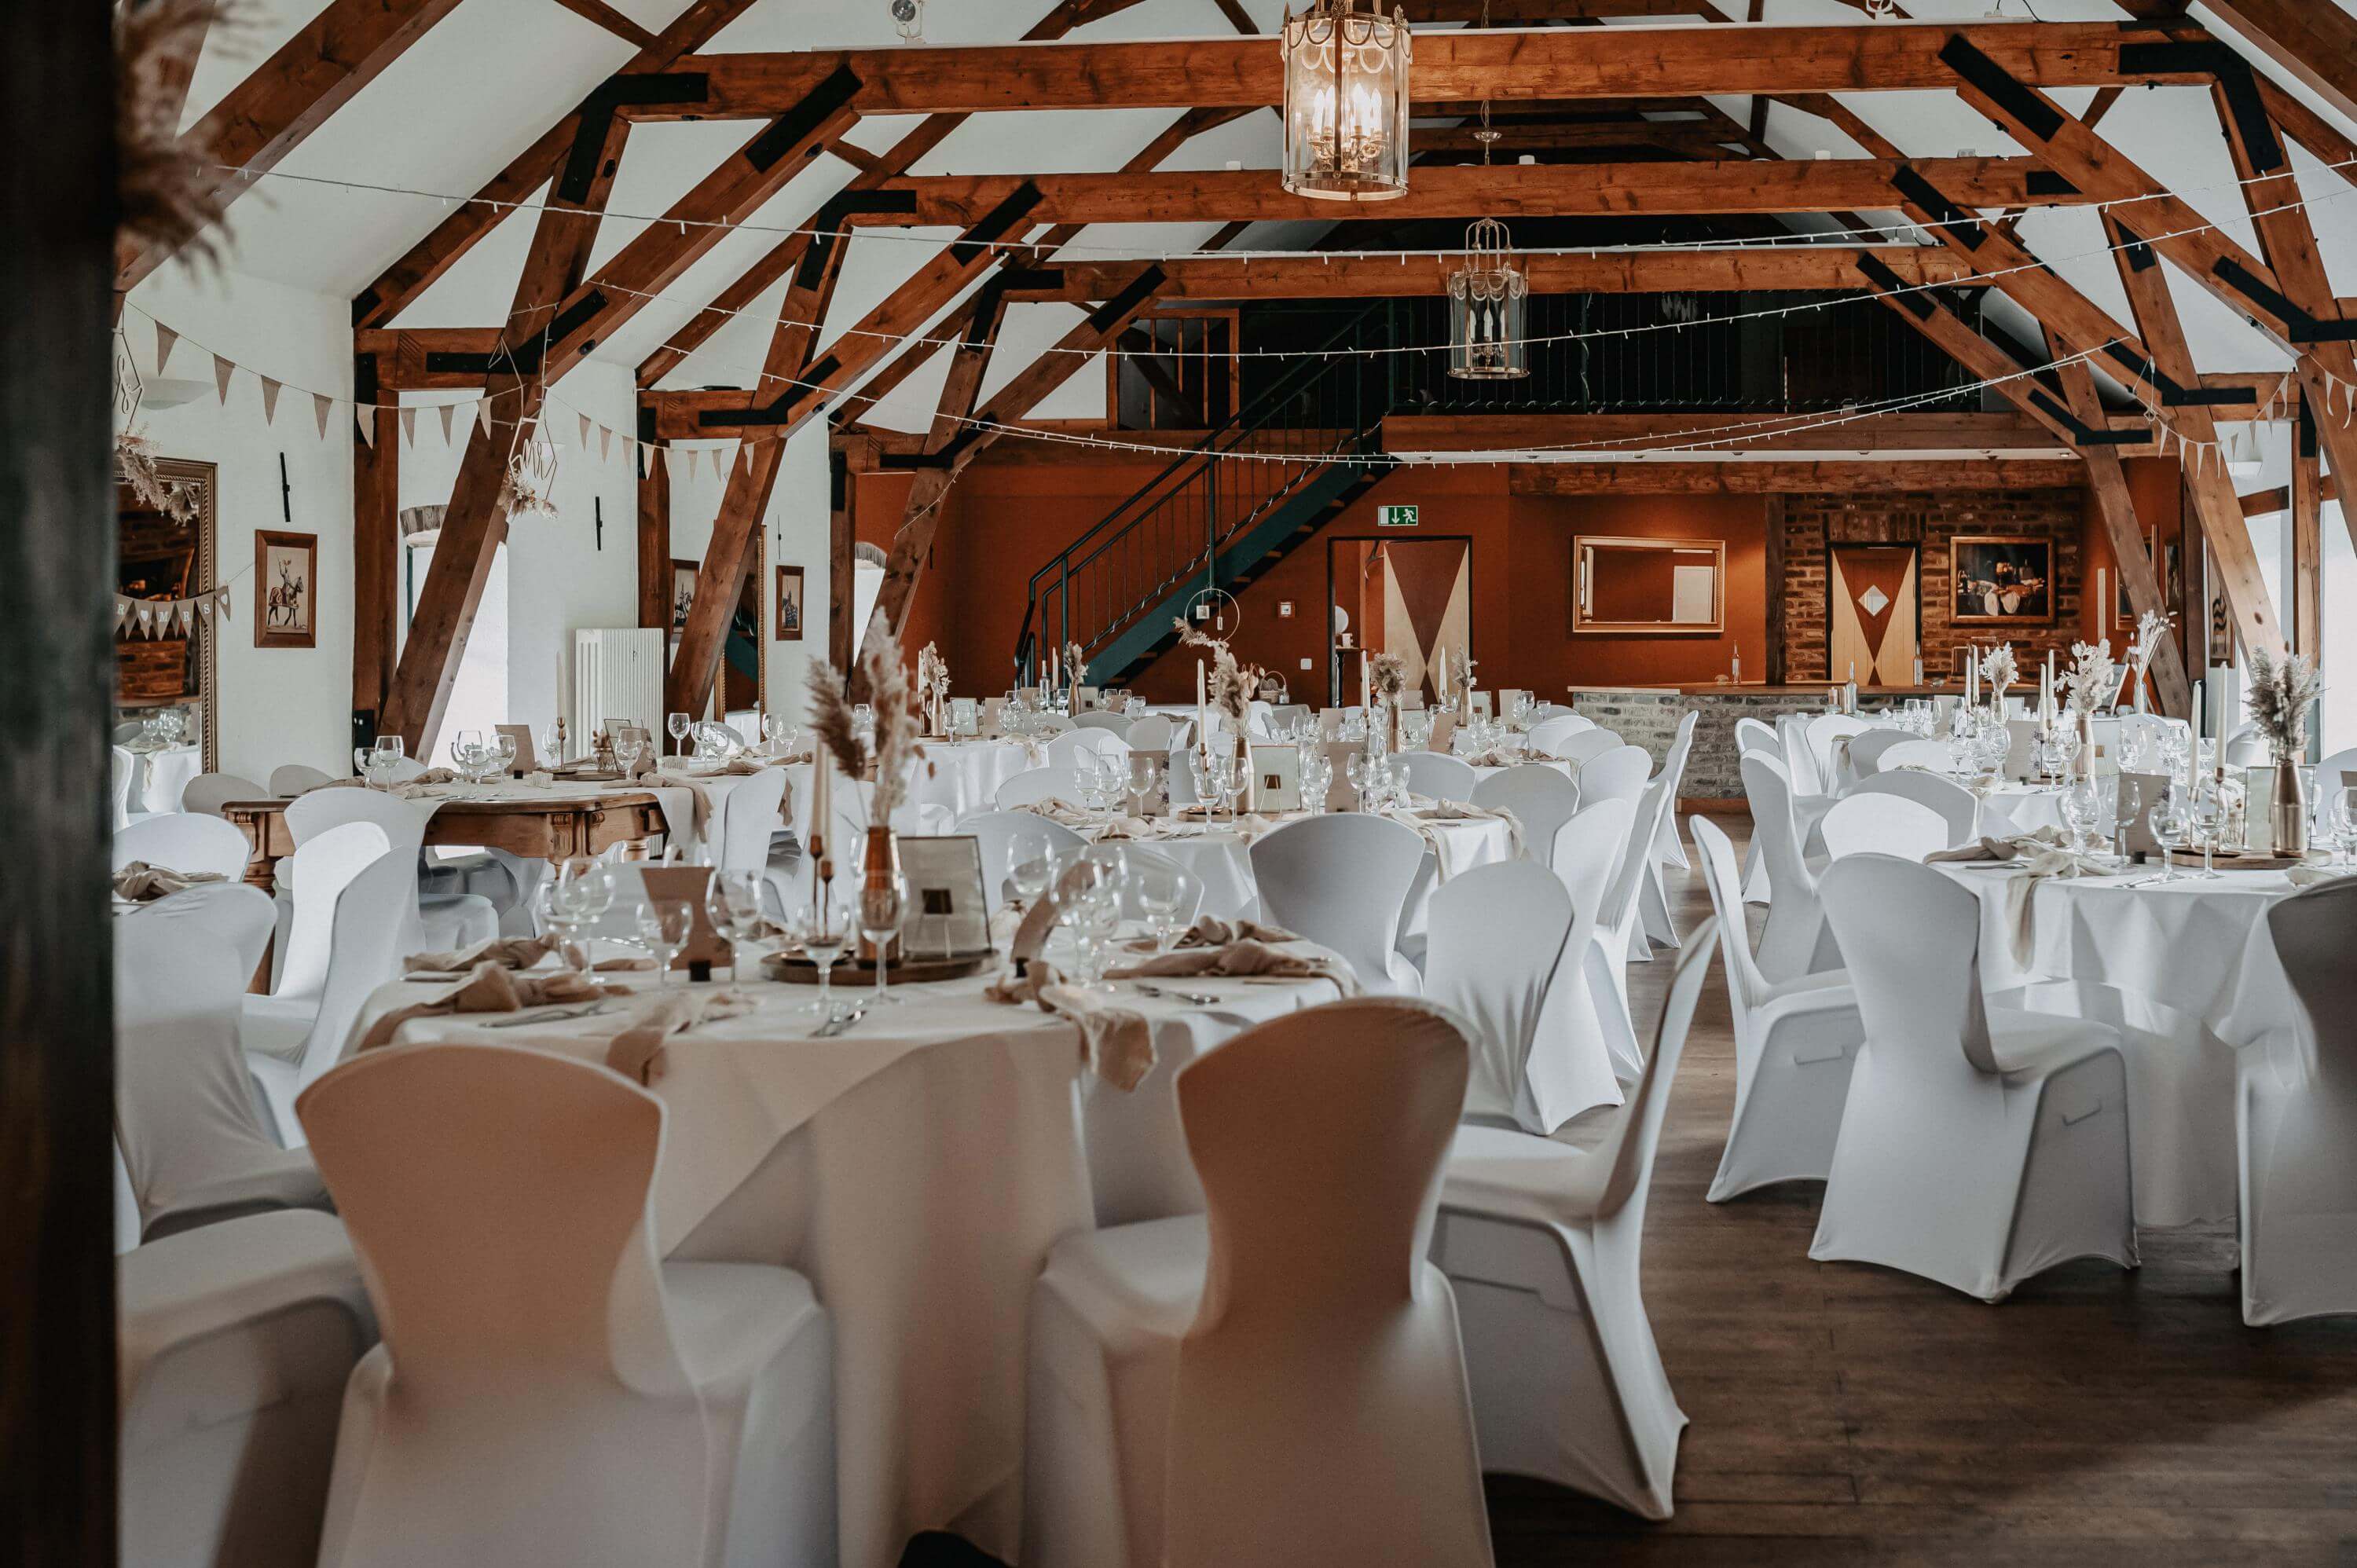 The large bright barn with wooden beams of the wedding location La Maison Blanche is decorated with round dining tables and chairs with white vintage-style covers.